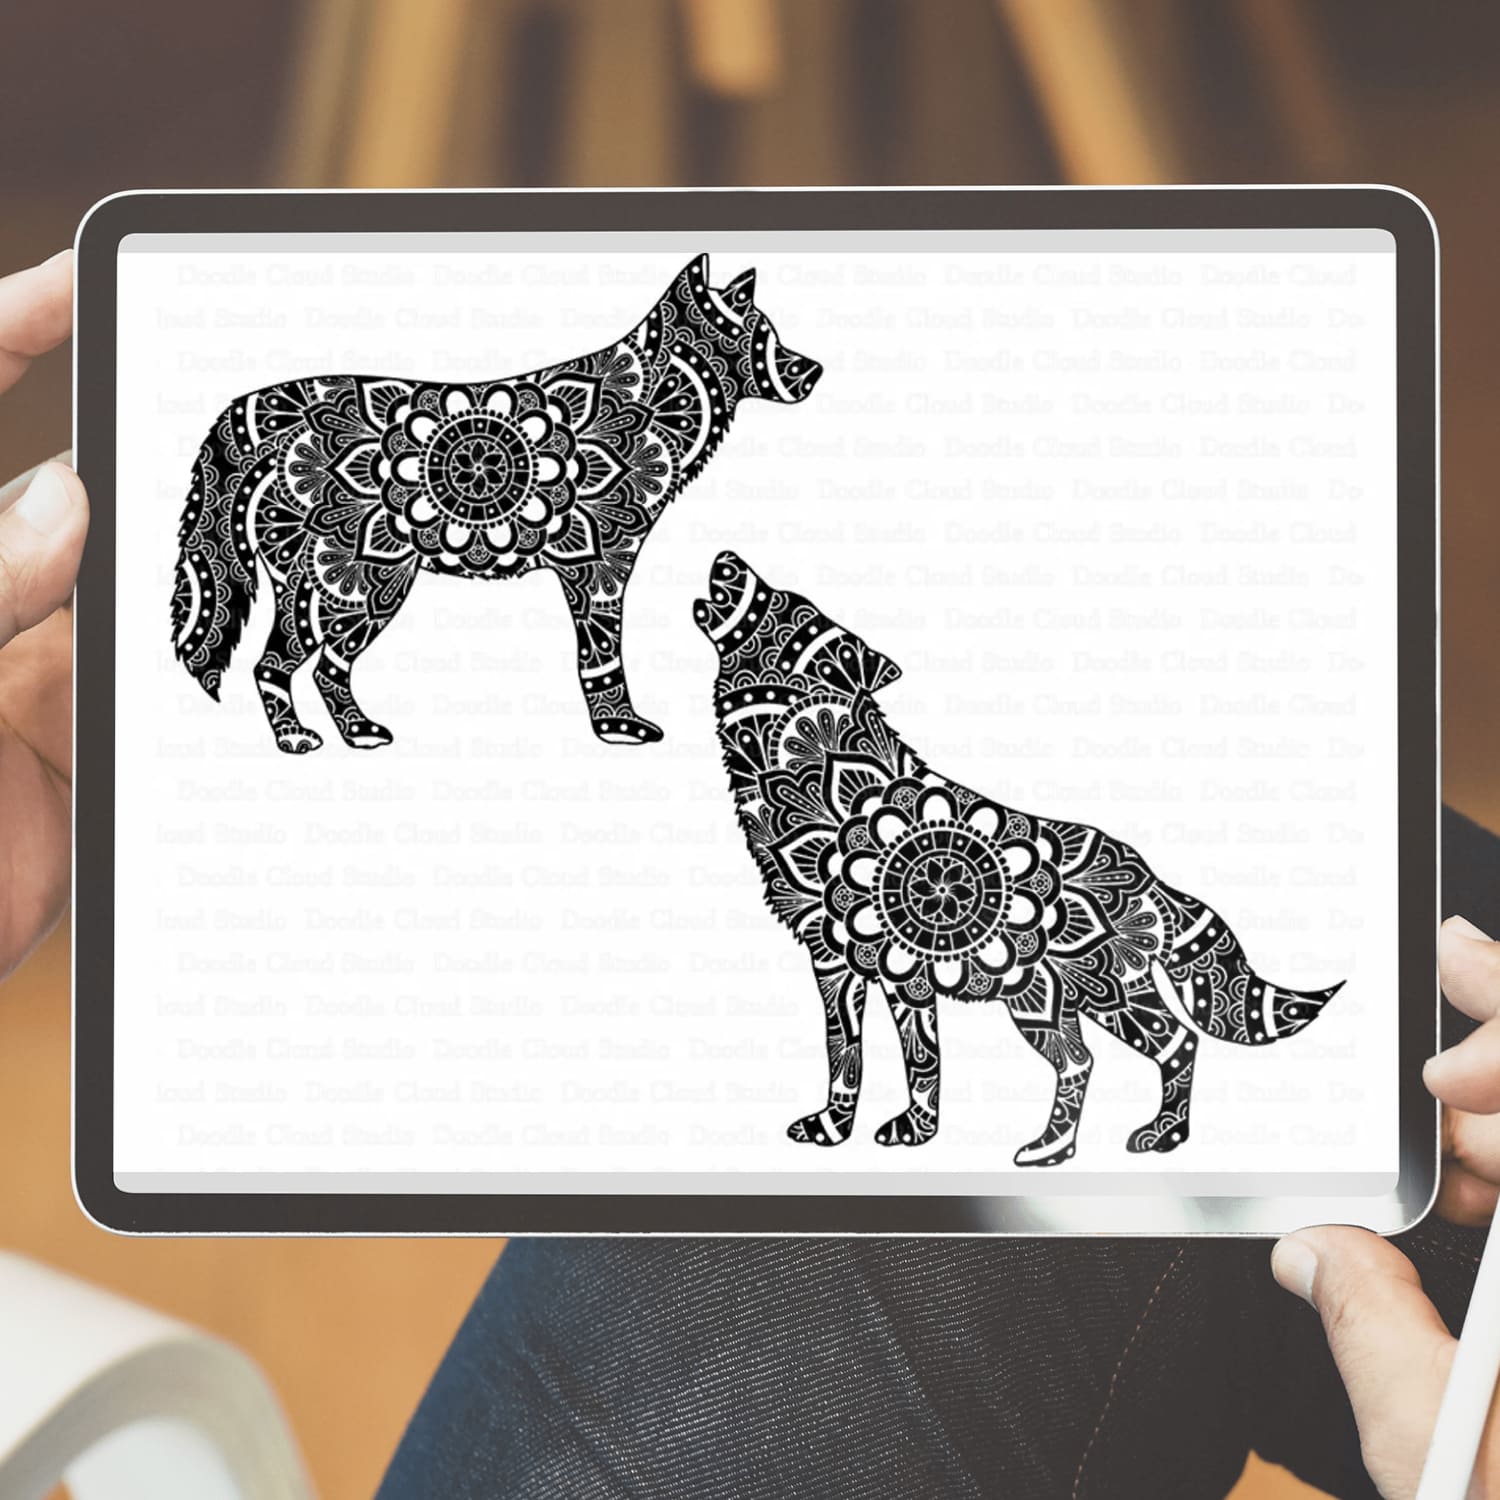 Person holding a tablet with a picture of two dogs on it.